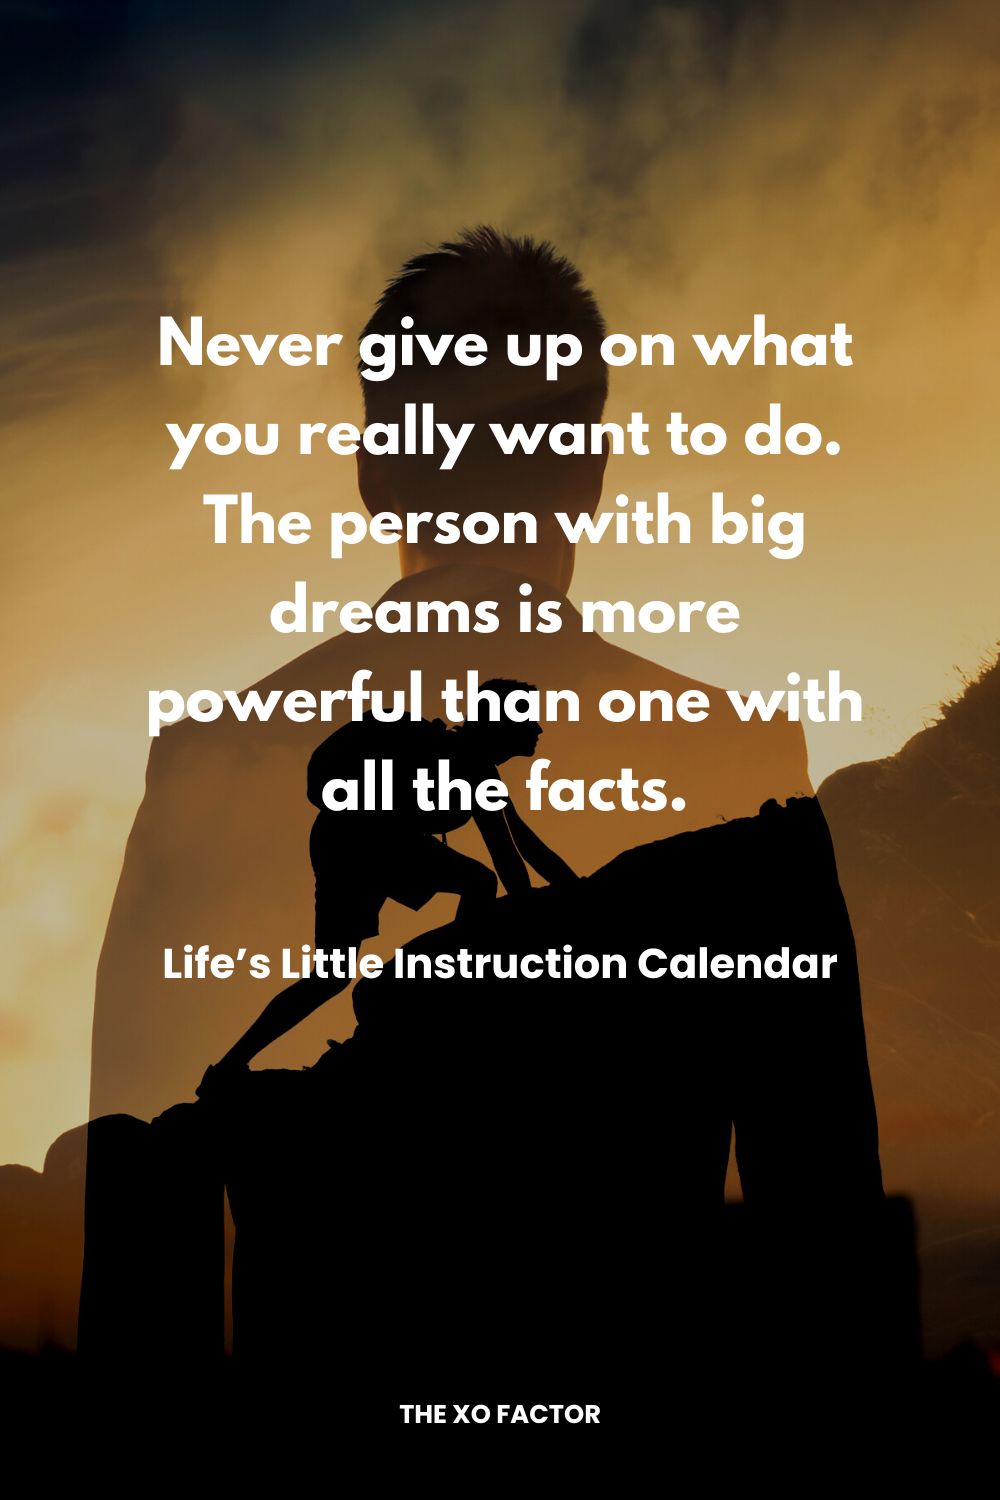 Never give up on what you really want to do. The person with big dreams is more powerful than one with all the facts. Life’s Little Instruction Calendar